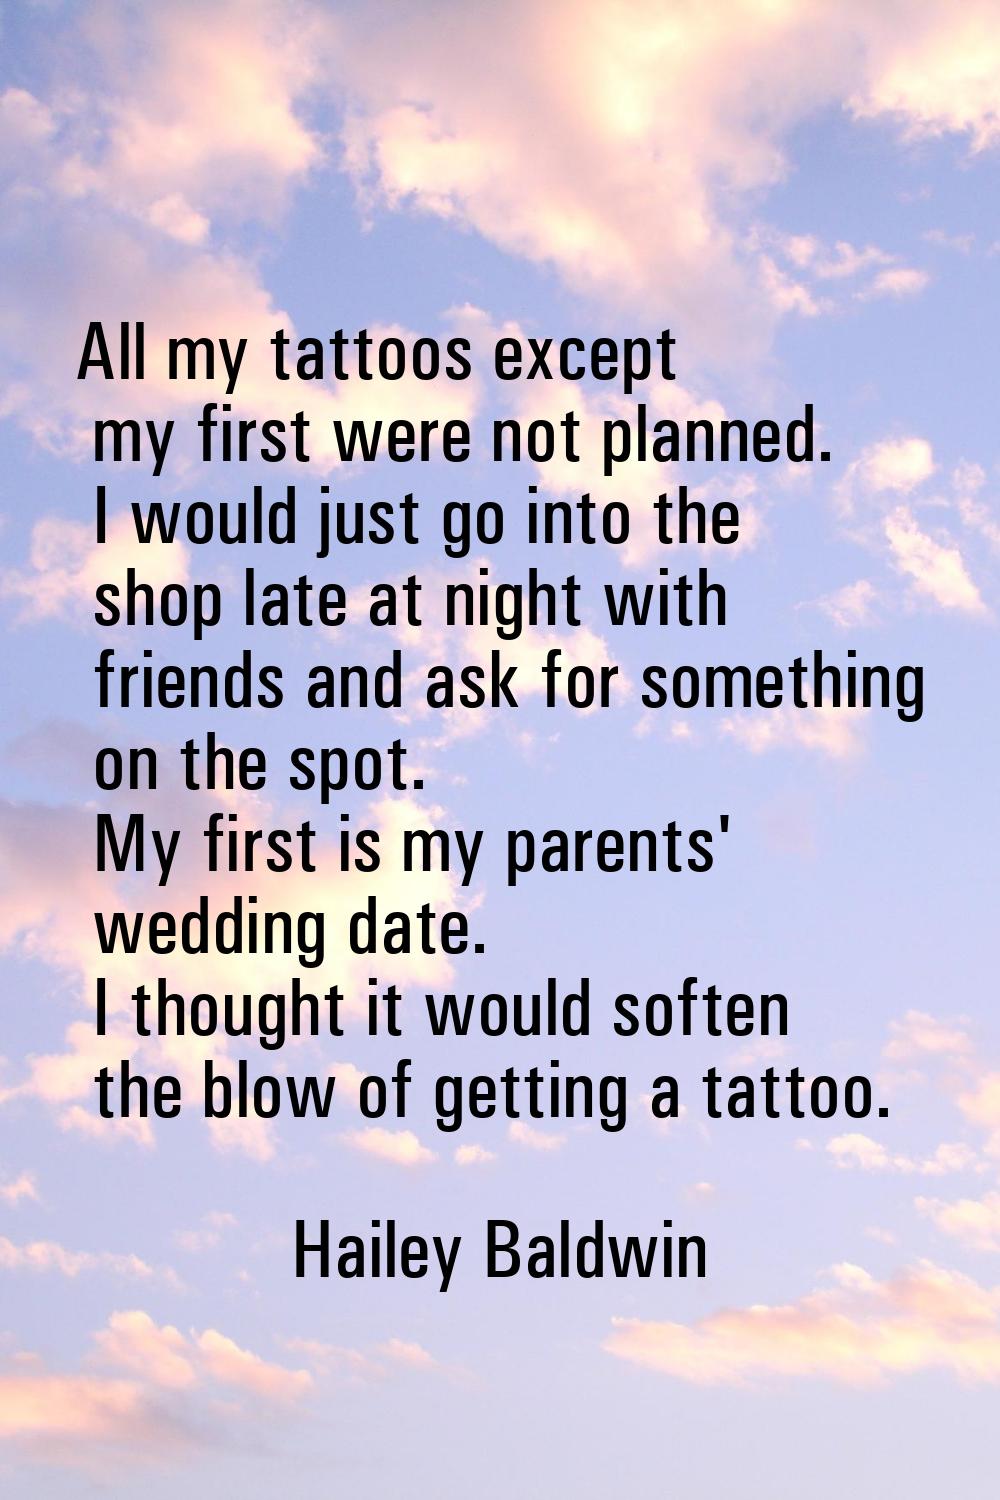 All my tattoos except my first were not planned. I would just go into the shop late at night with f